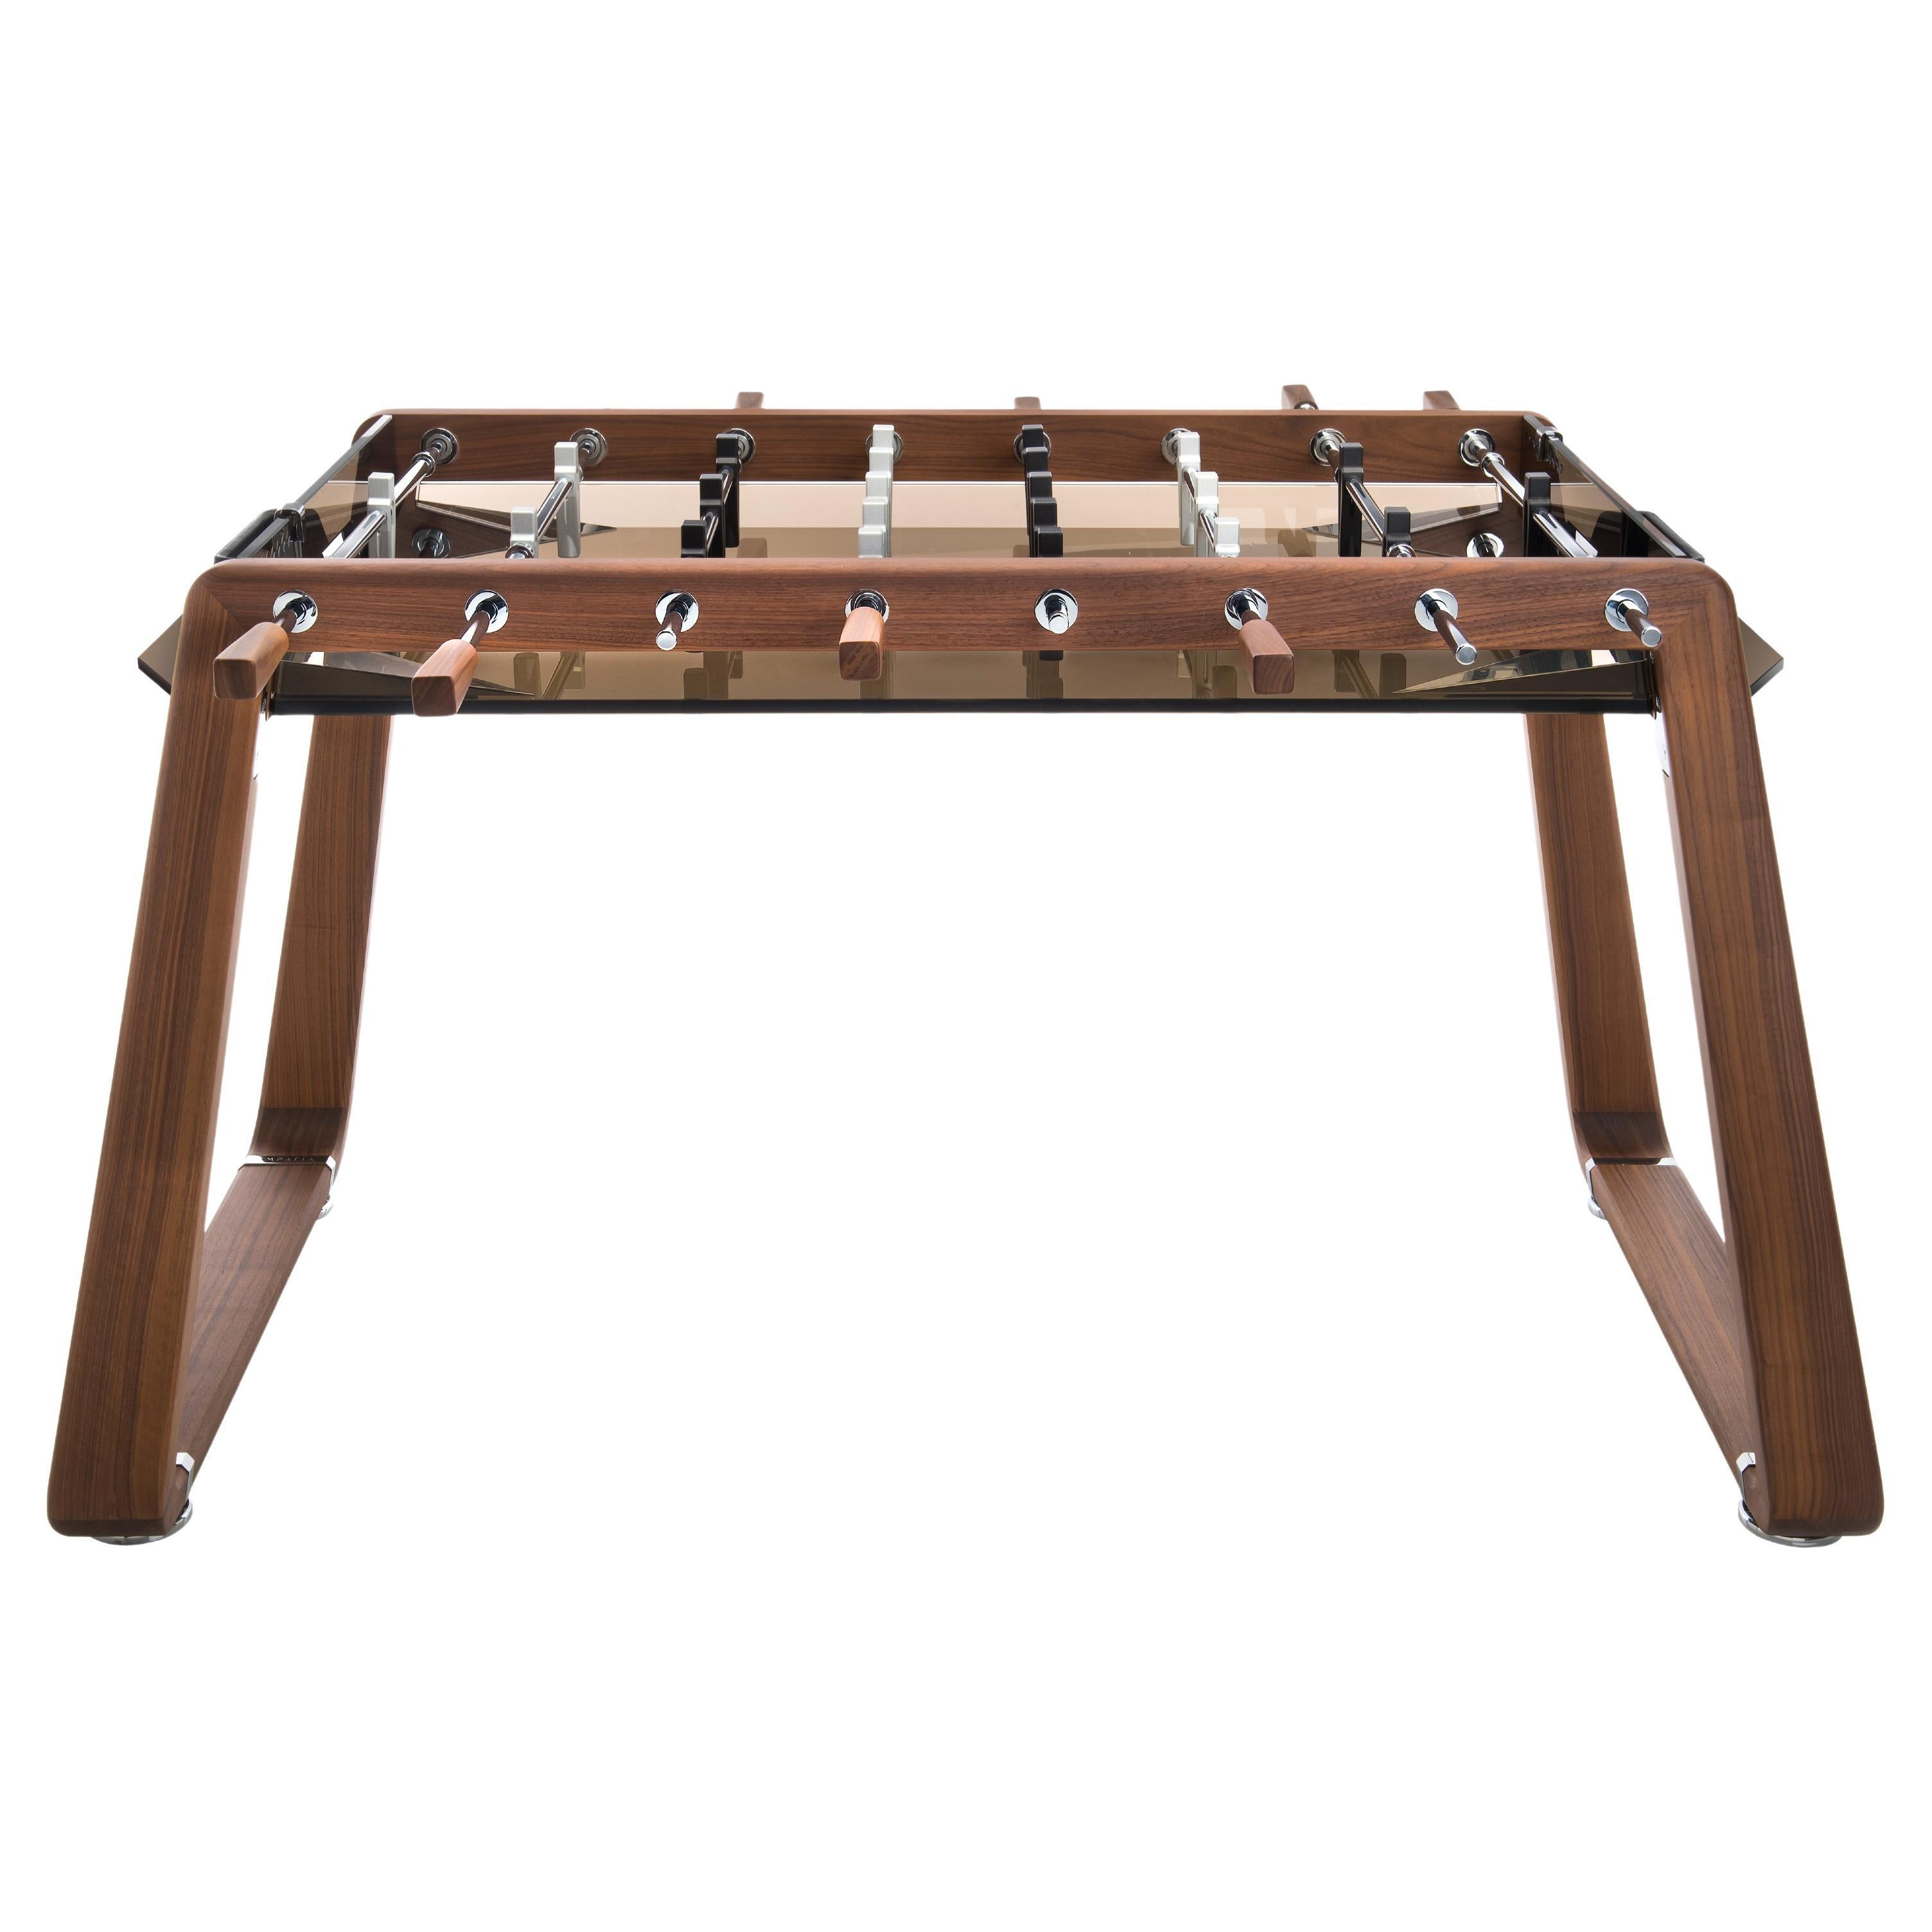 Contemporary Foosball Table Derby with Walnut Wood and Smoked Glass by Impatia For Sale